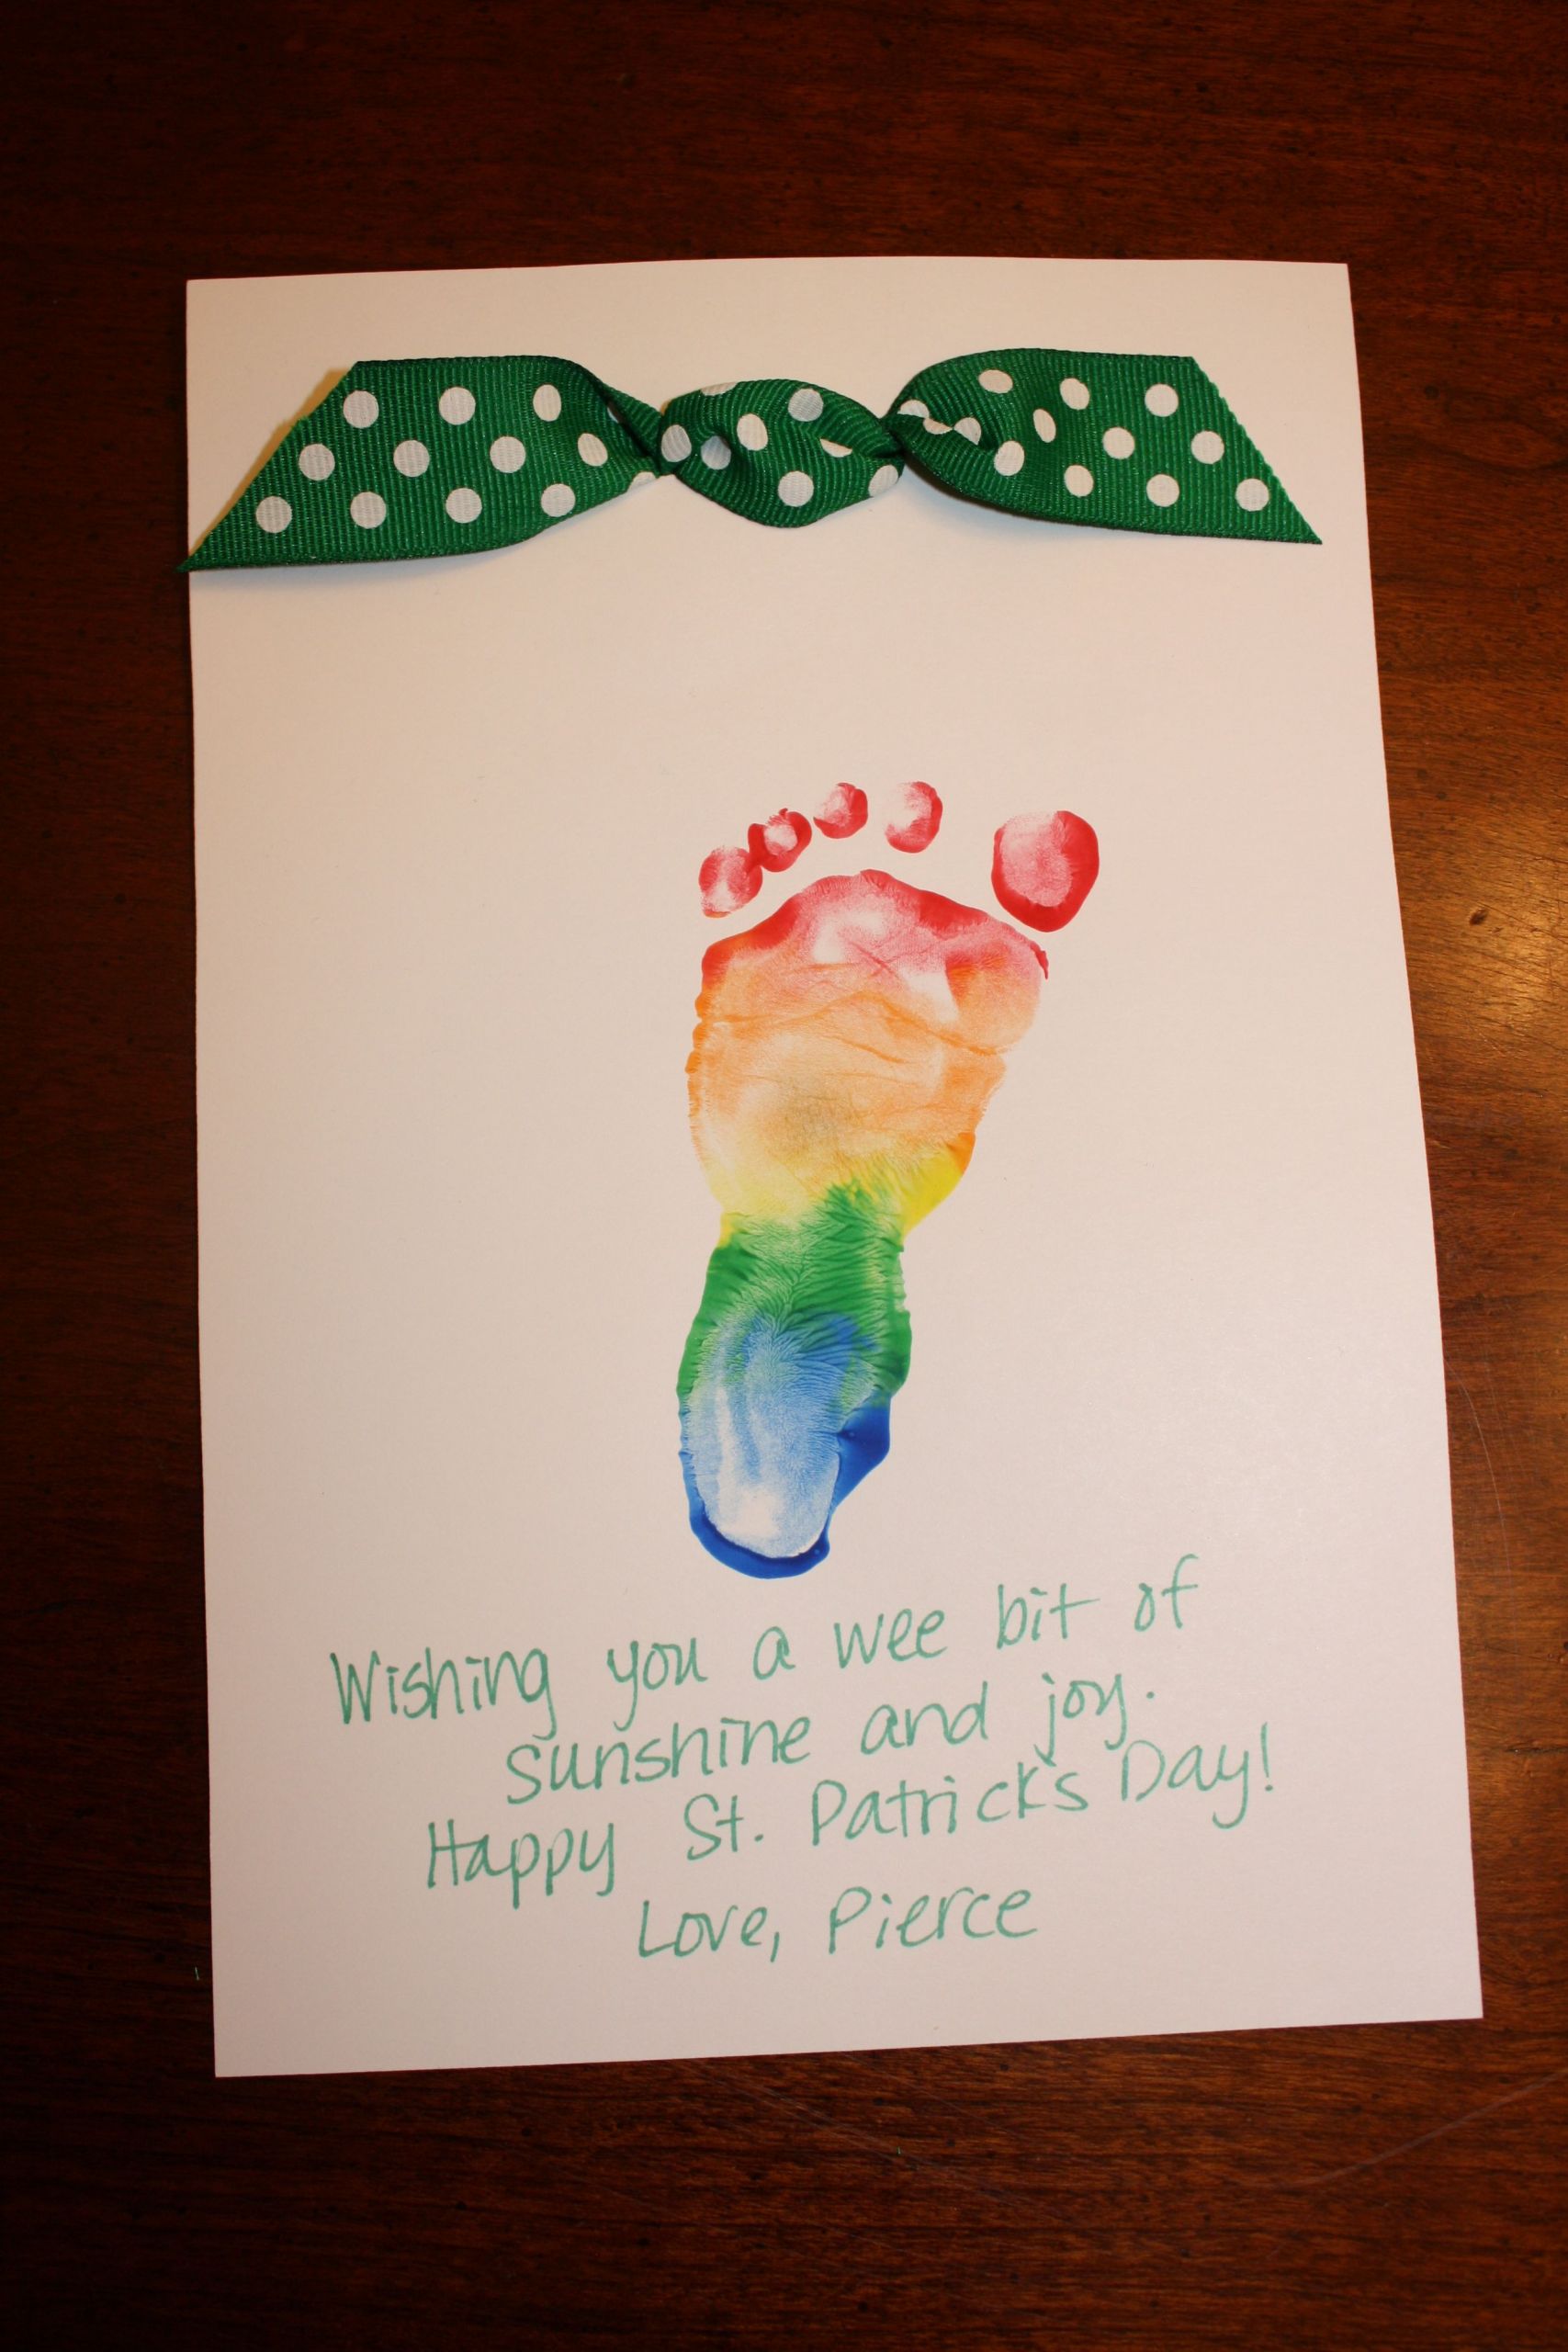 St Patrick's Day Baby Picture Ideas
 St Patrick s Day Cards